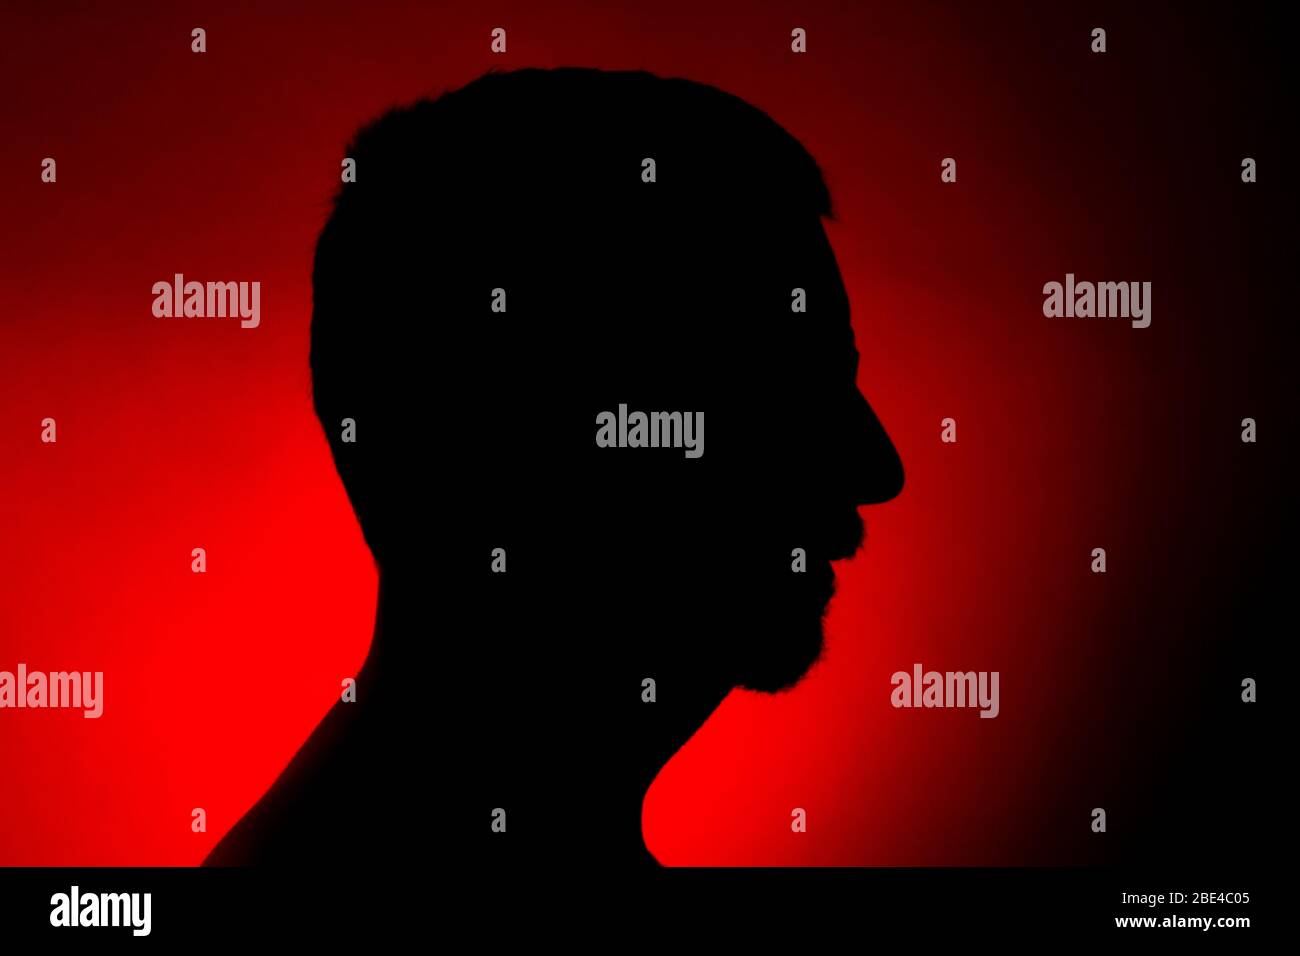 Cleanly defined silhouette of a male person against a red